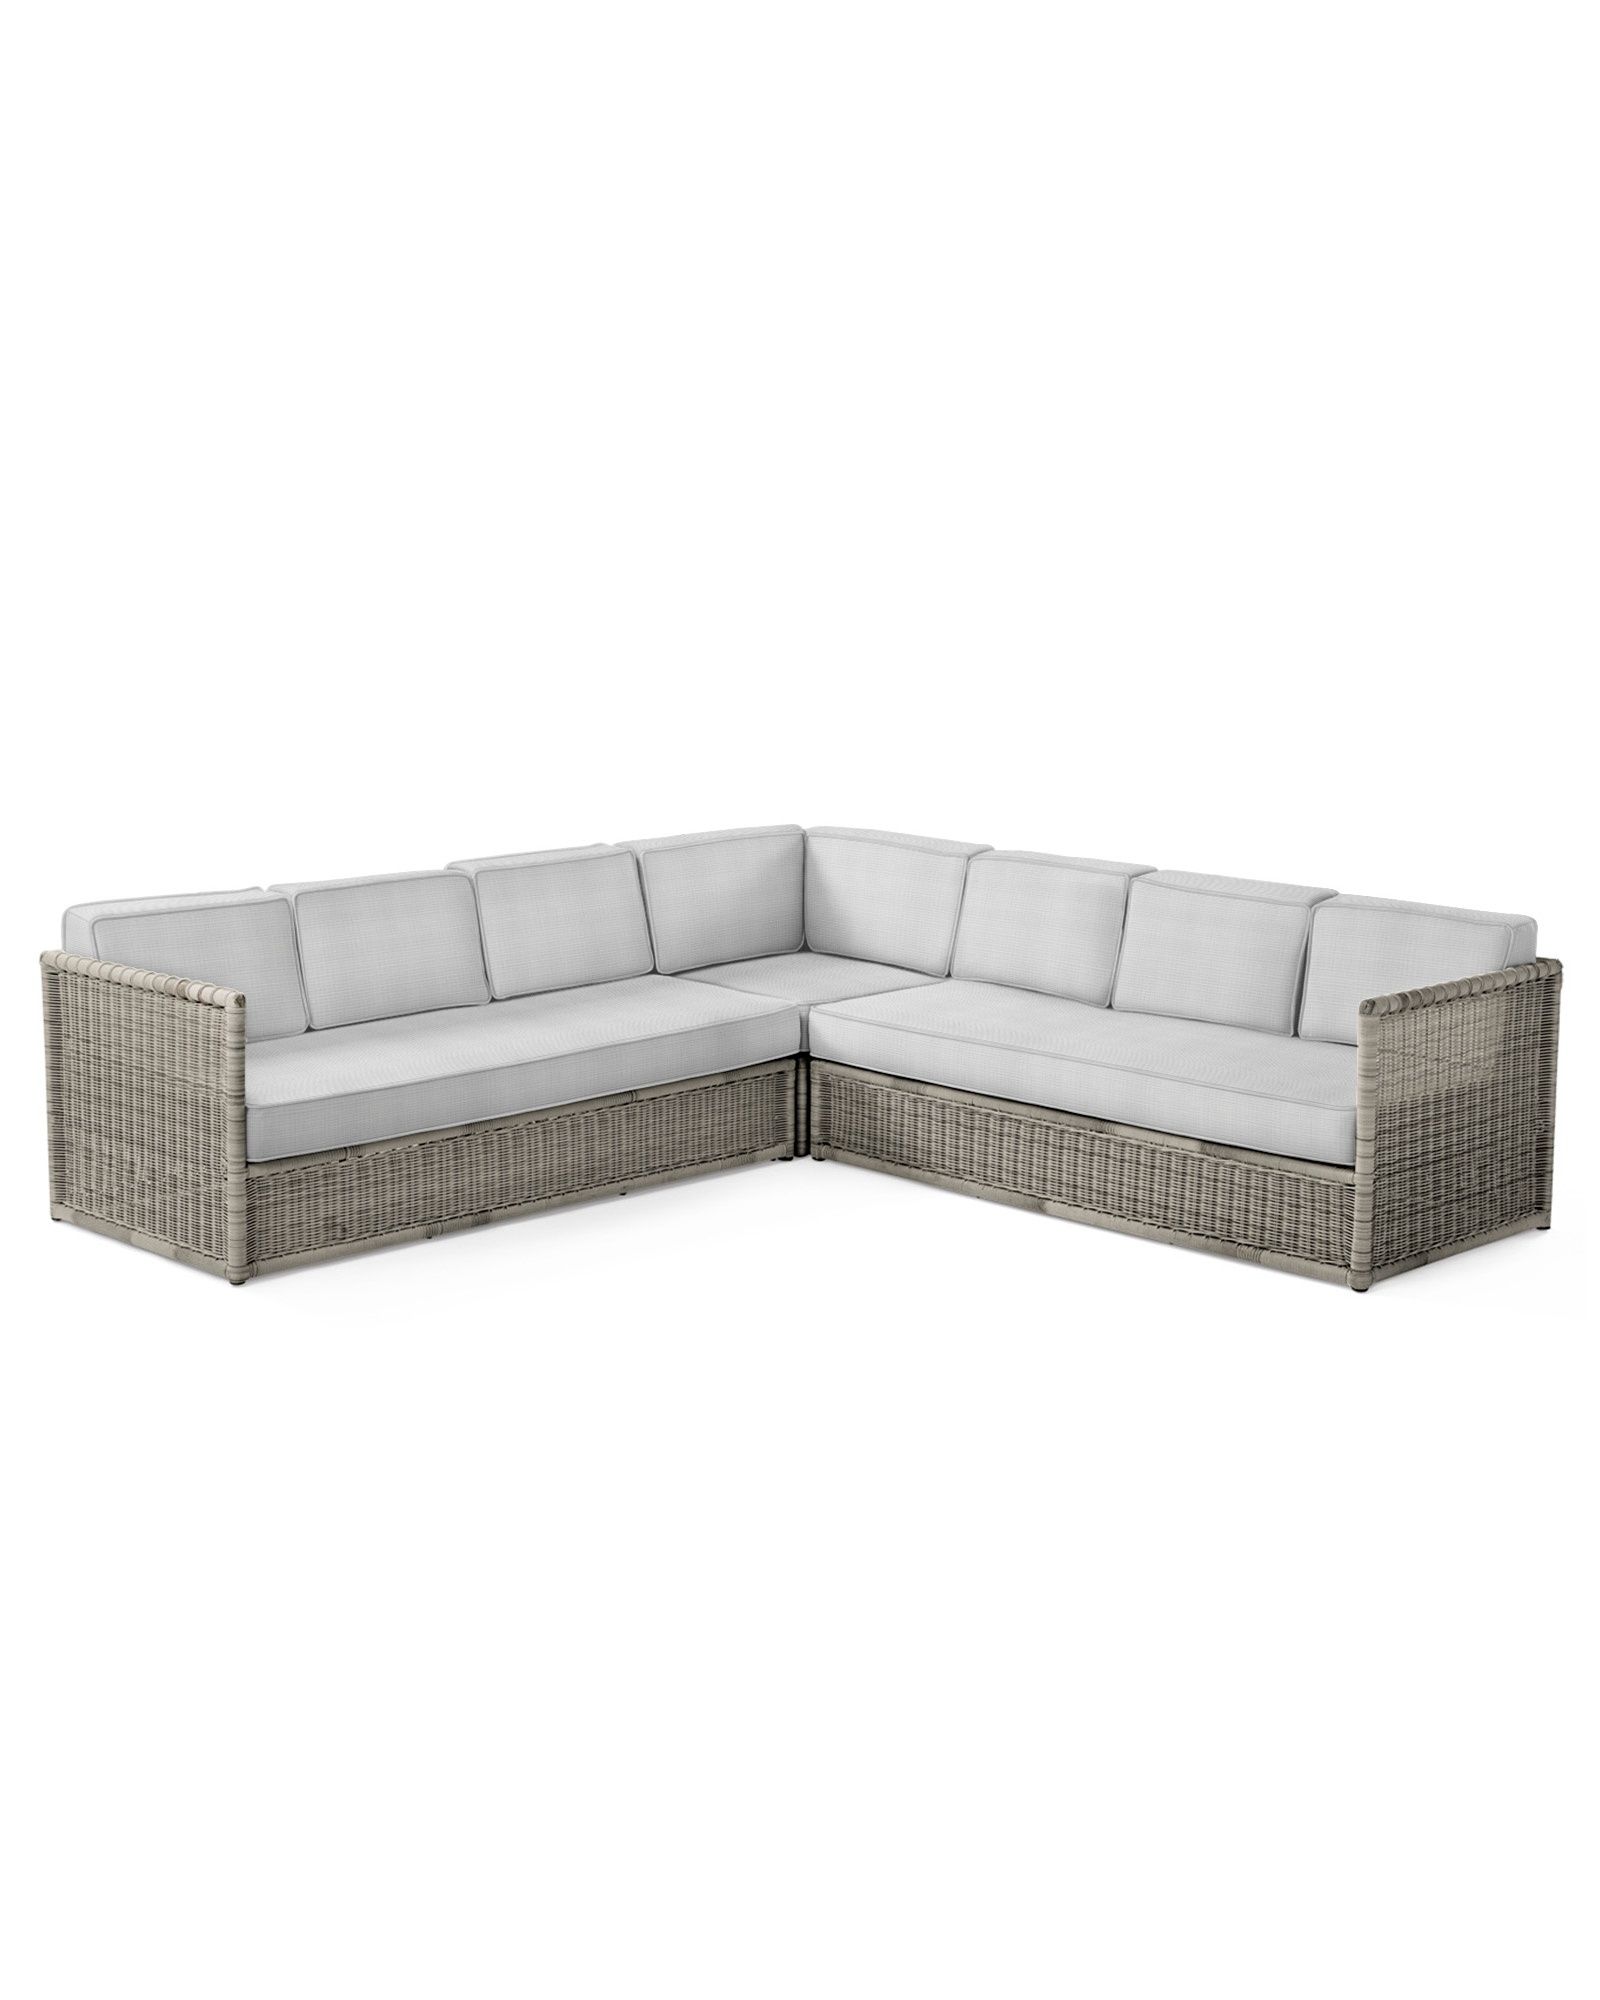 Pacifica Corner Sectional - Harbor Grey | Serena and Lily